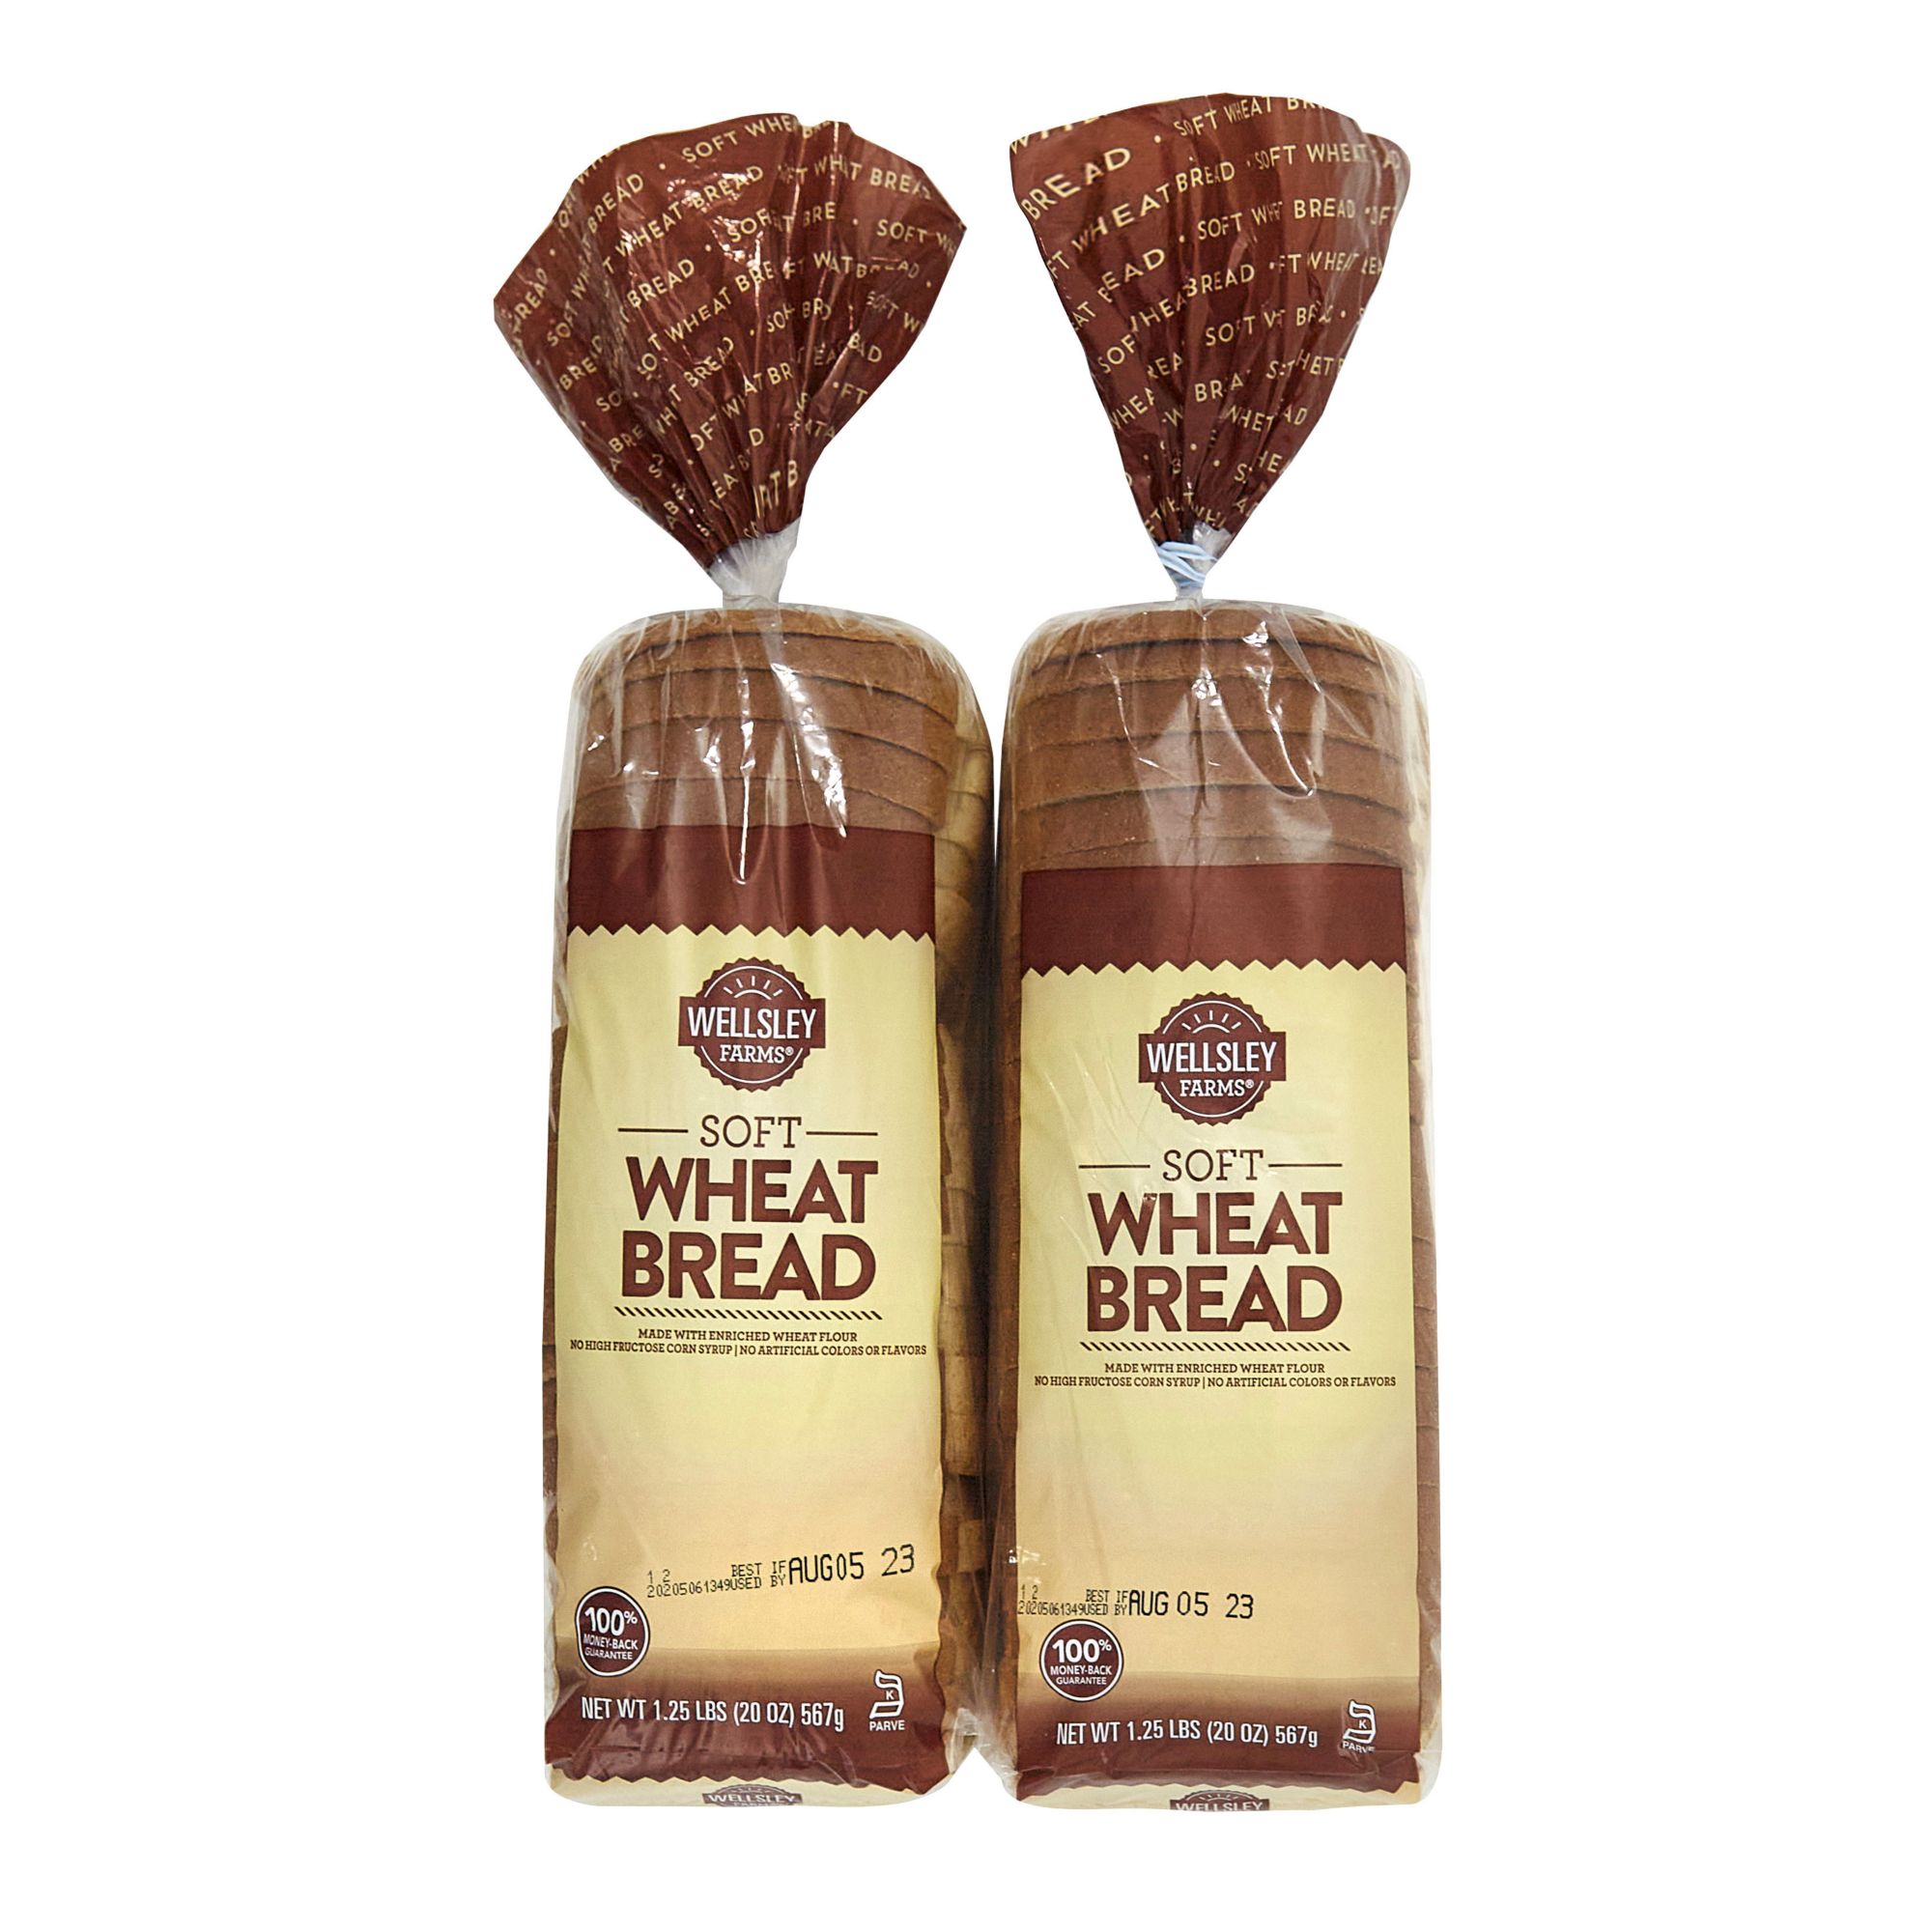  Nature's Own Honey Wheat Bread: 2-Pack of 20 oz Honey Wheat  Sandwich Loaves : Grocery & Gourmet Food